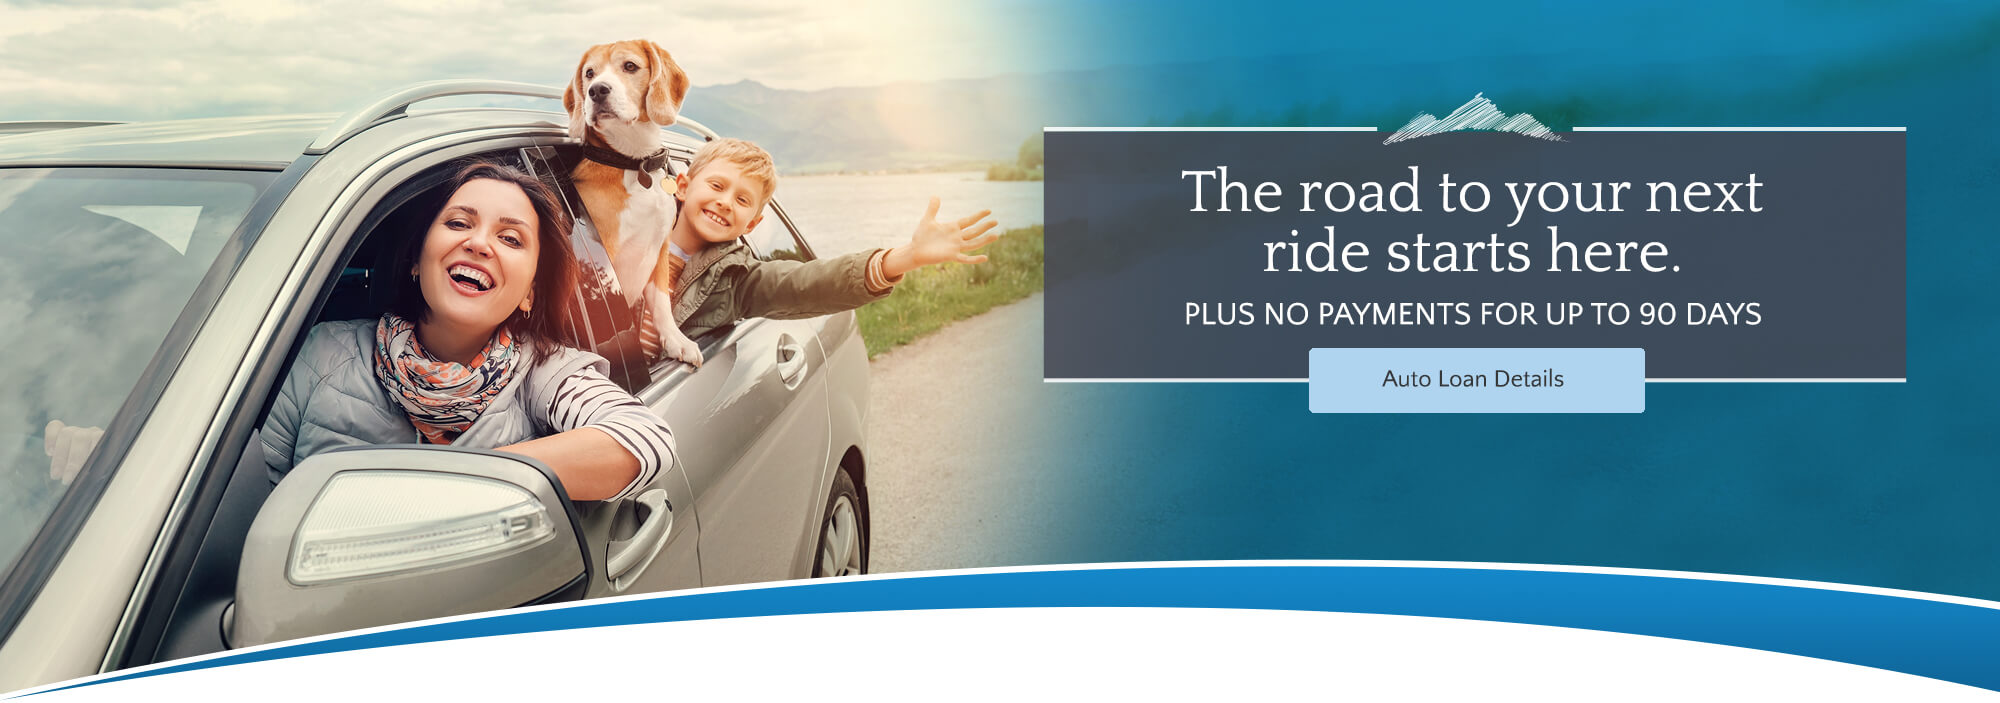 The road to your next ride starts here. Plus no payments for up to 90 days. Auto Loan Details